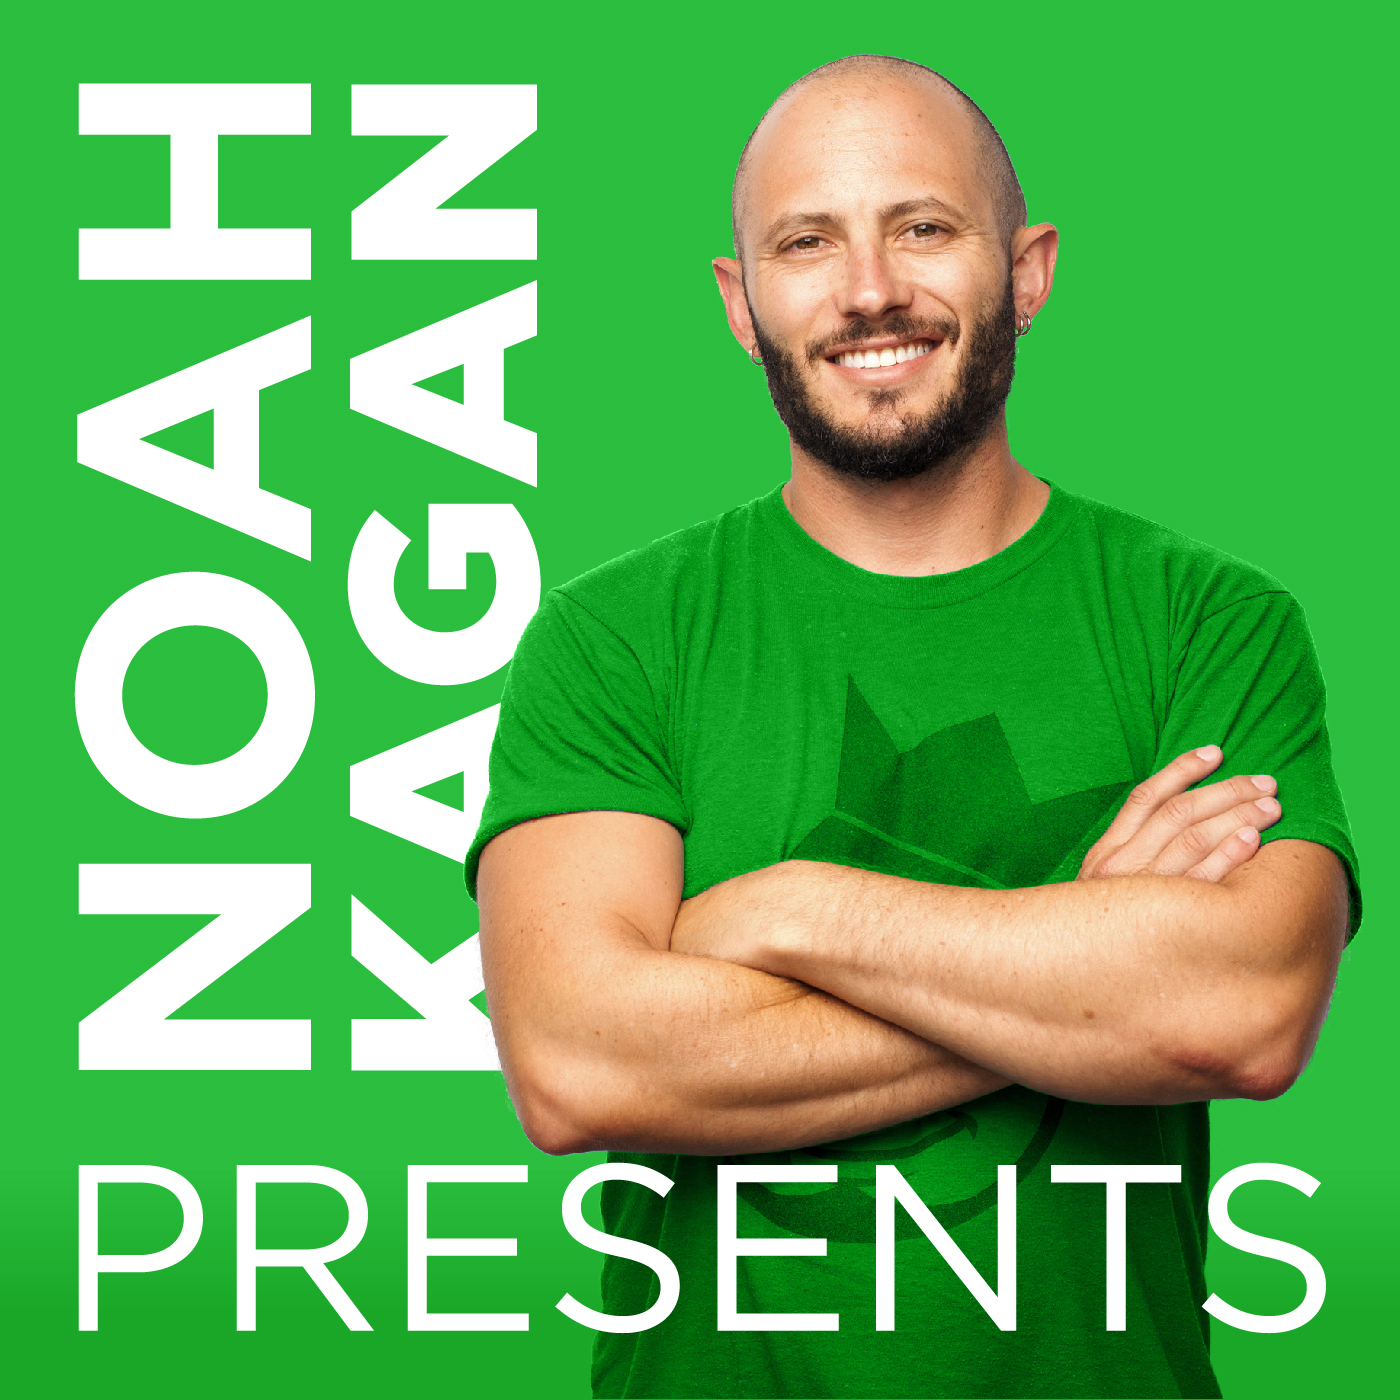 Noah Kagan's Sports Betting Website Did $30M+ in Revenue Its First Year